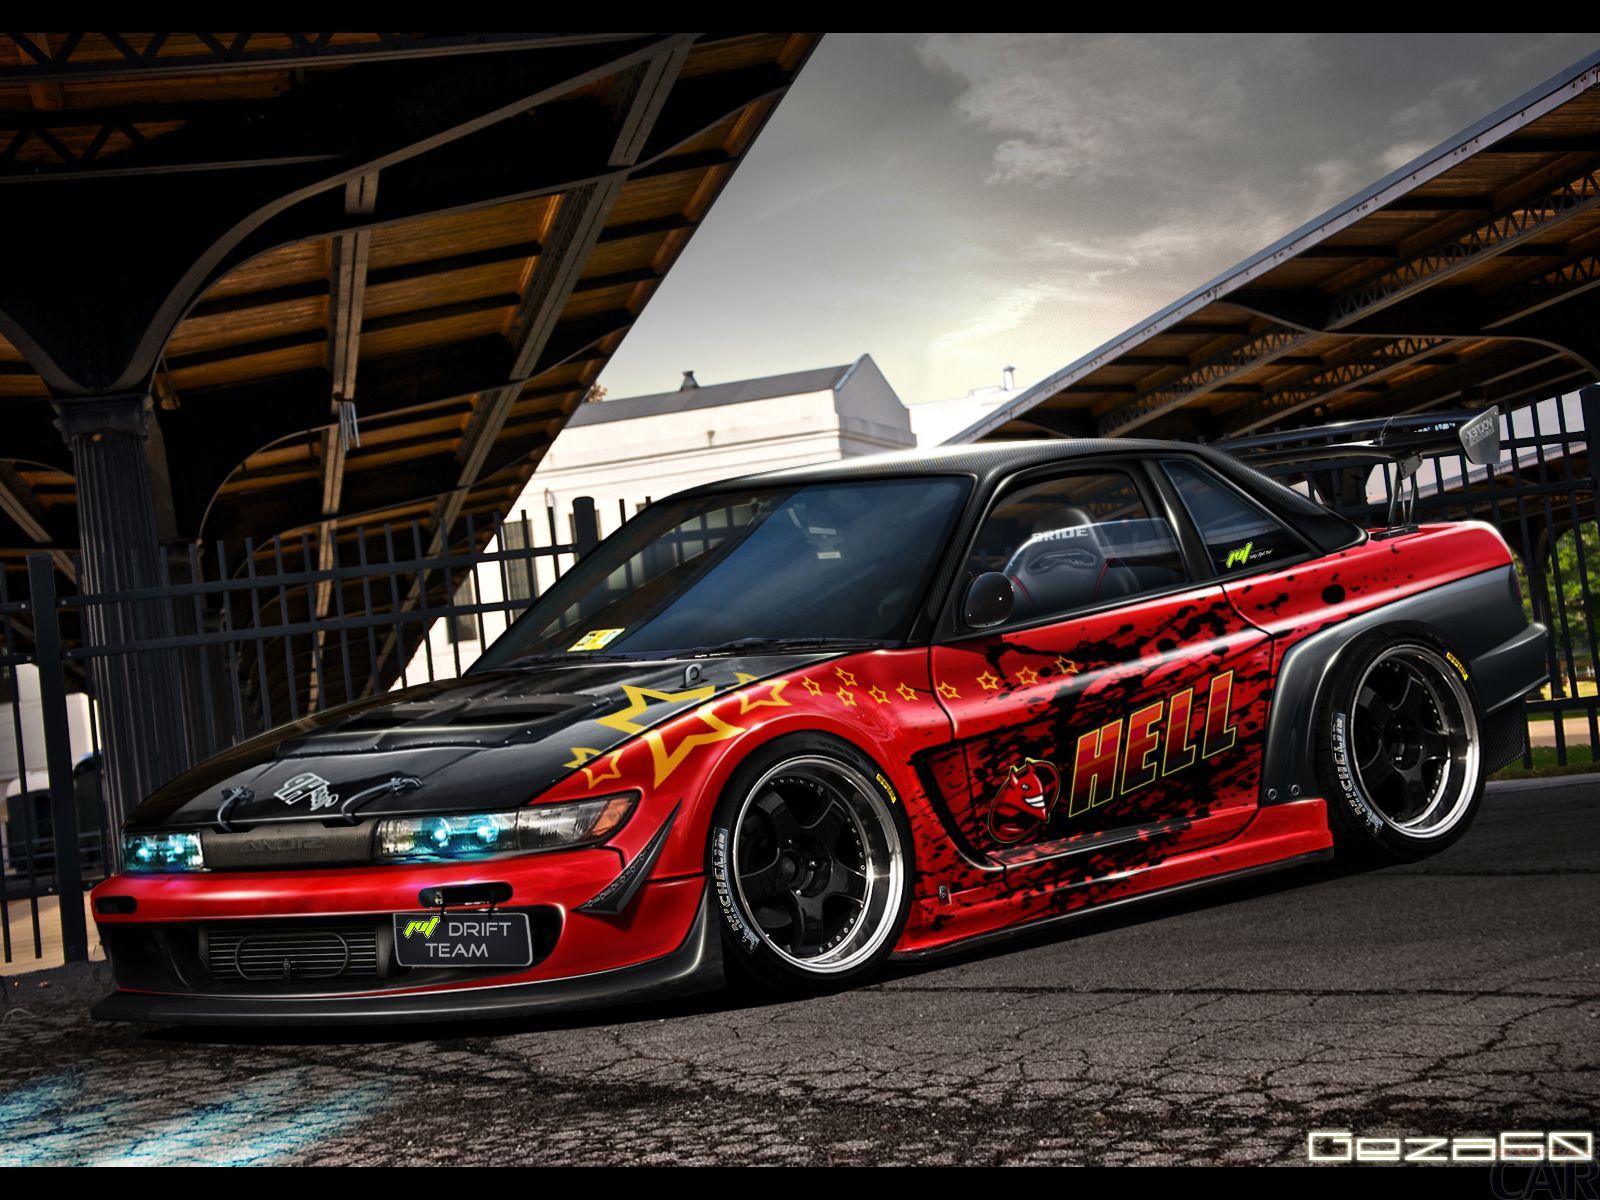 Conscientious car NISSAN SILVIA S13 with new urbanistic drives well reaching the general shape of